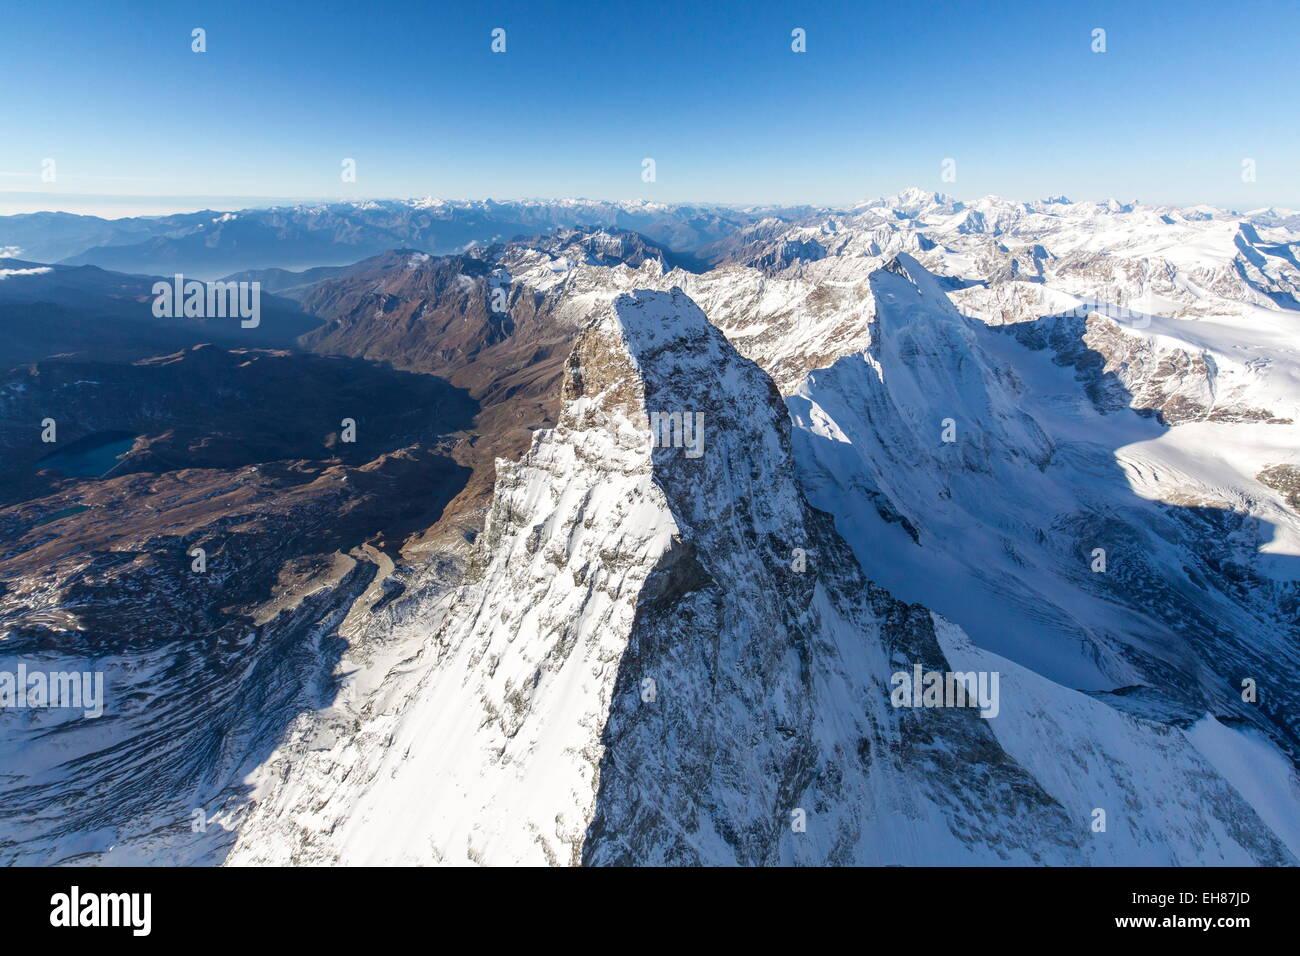 The Matterhorn surrounded by its mountain range covered in snow, Swiss Canton of Valais, Swiss Alps, Switzerland Stock Photo